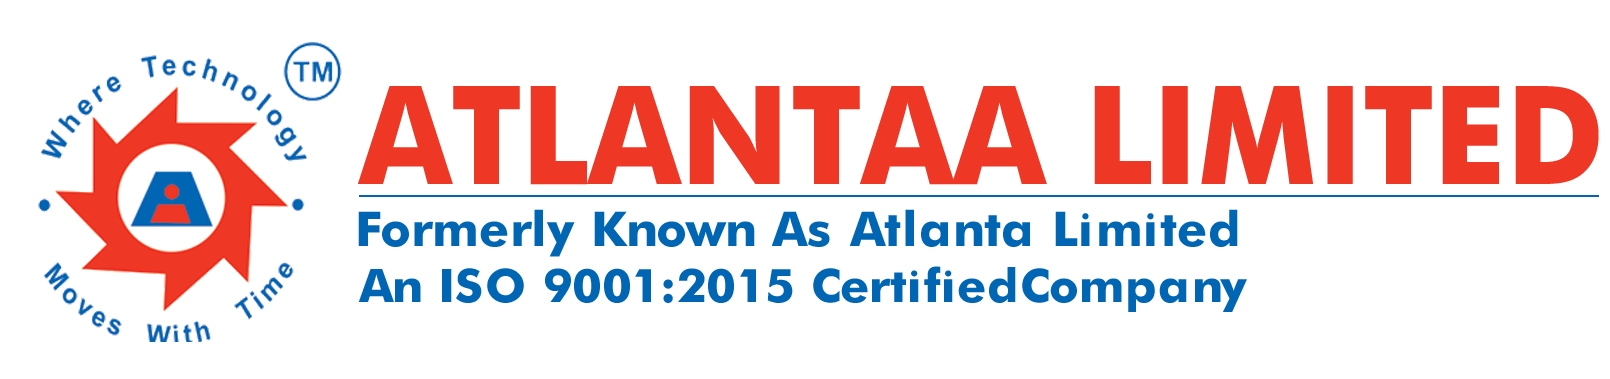 Atlantaa Limited-Infrastructure | Reality